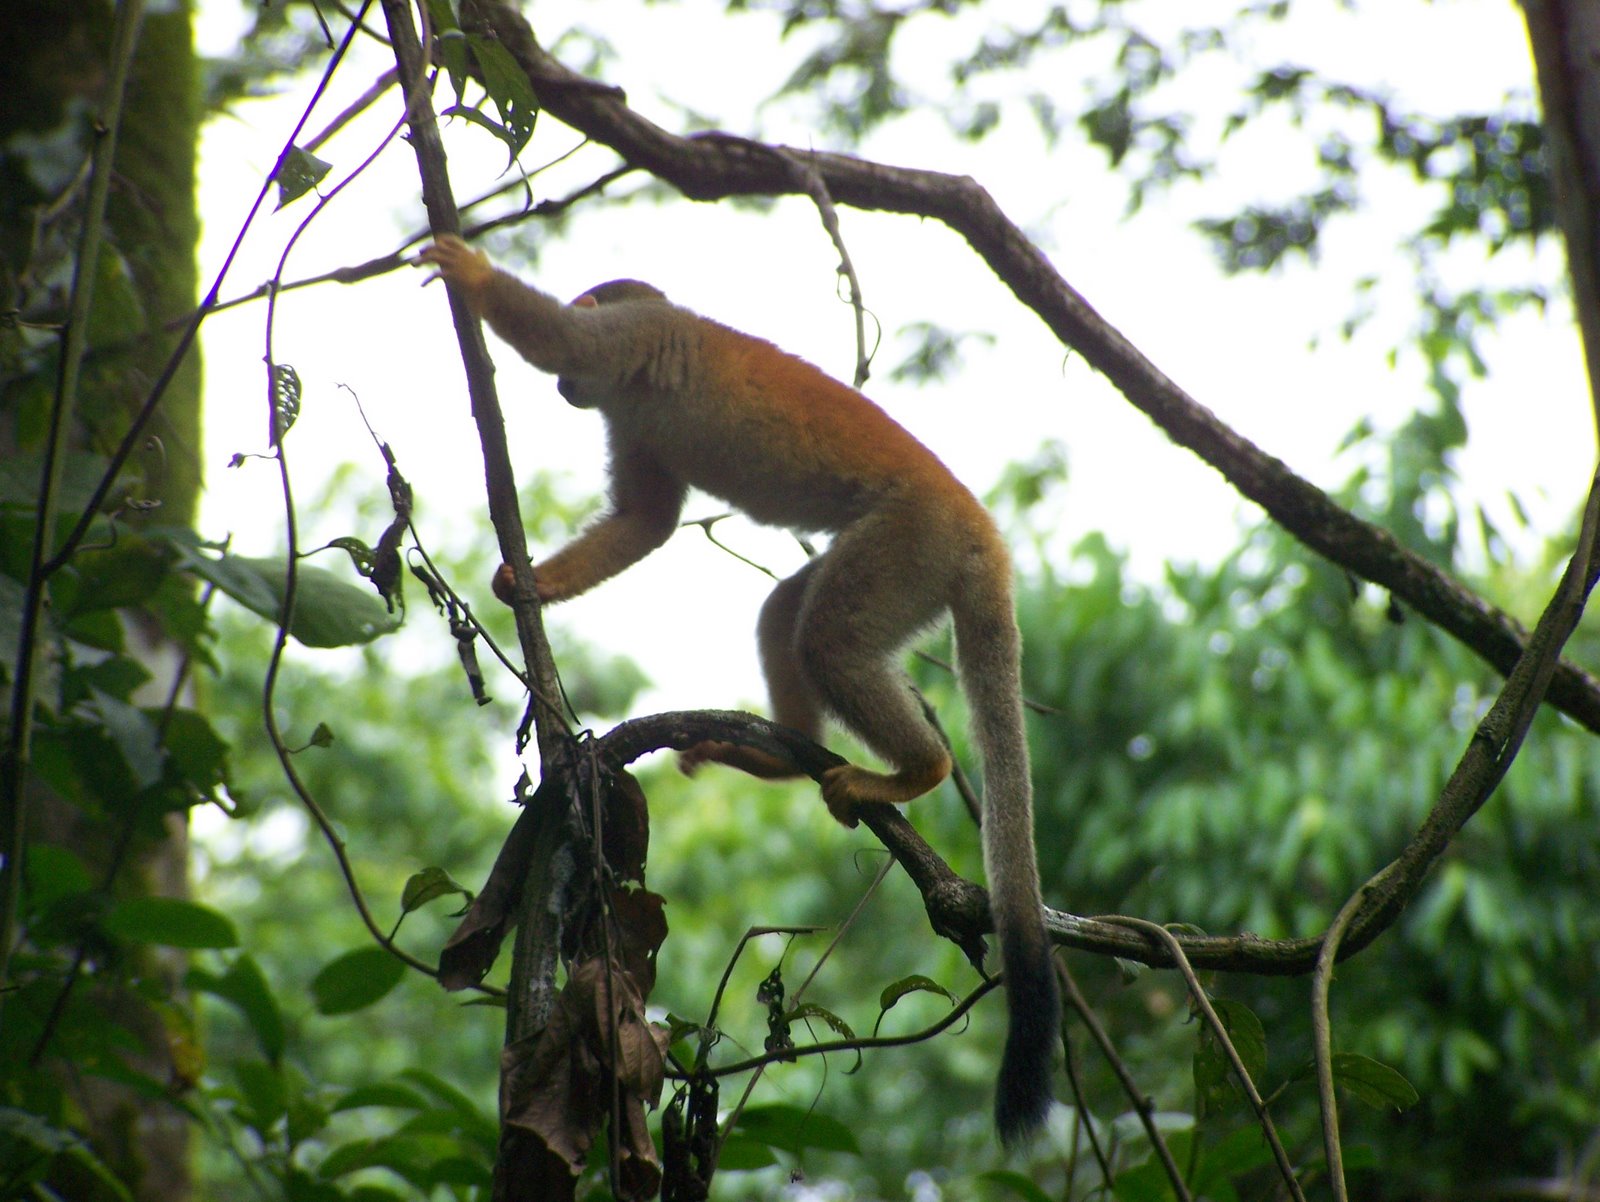 Burnt orange colored monkey swinging through the trees in central america